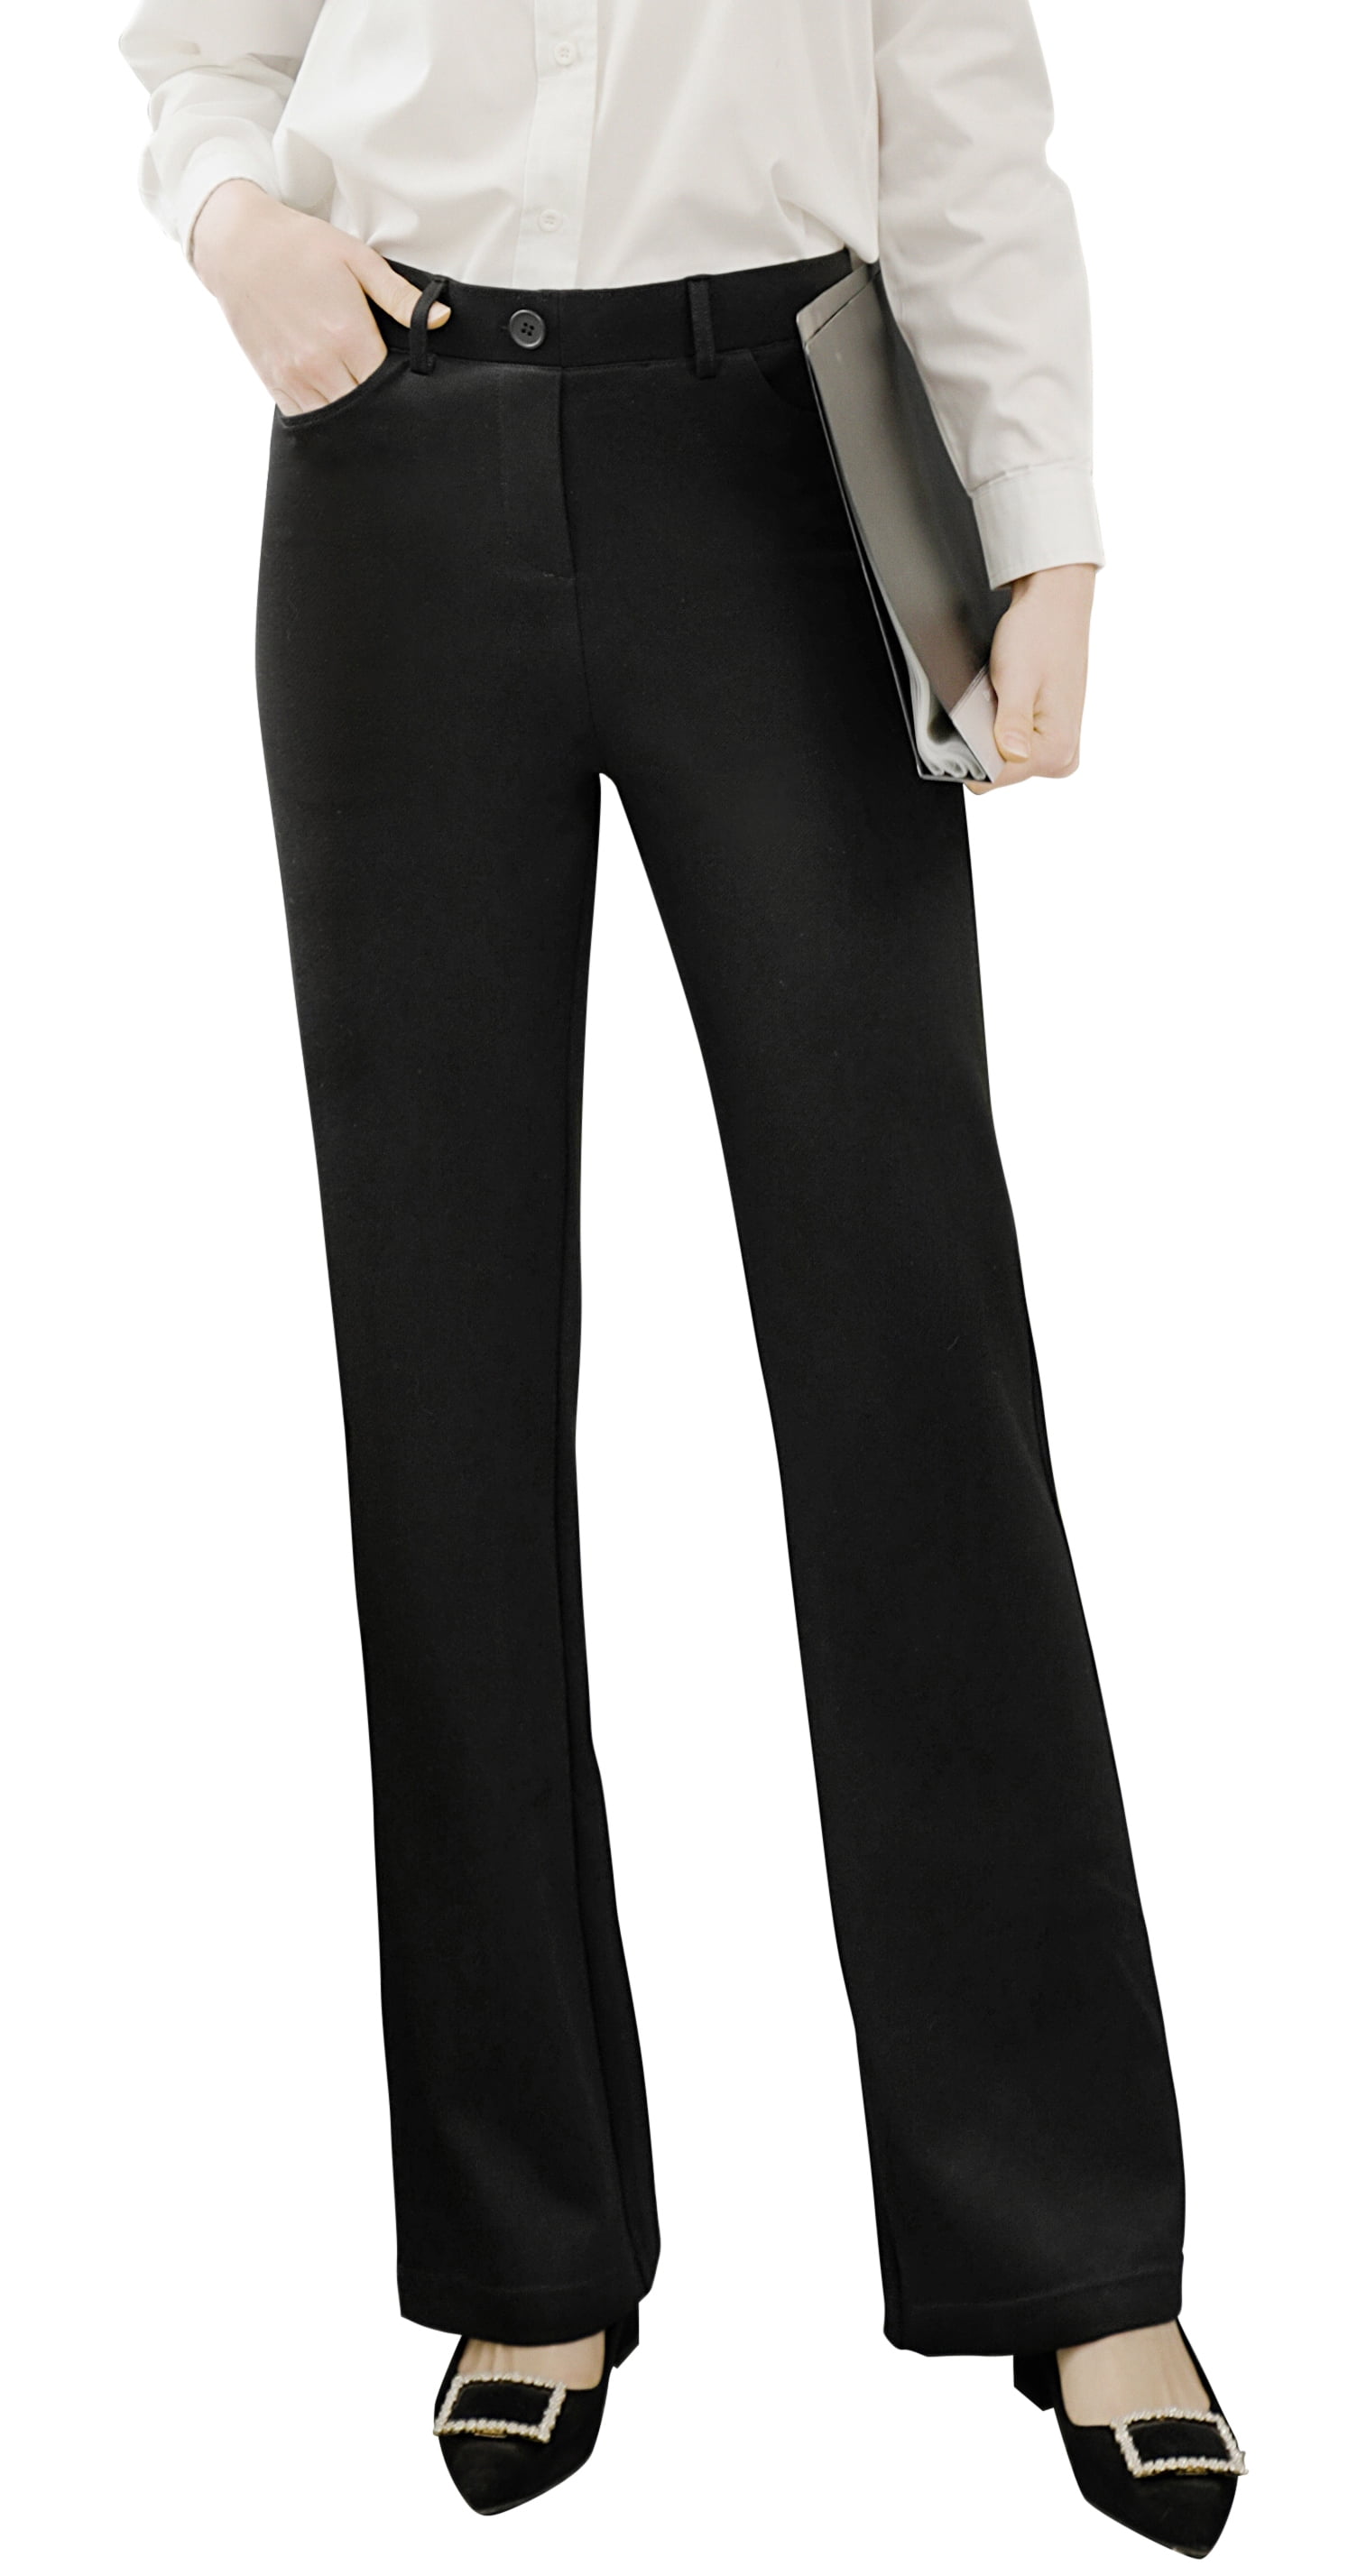 Women's Bootcut Yoga Dress Pants Pull-On Stretch Work Business